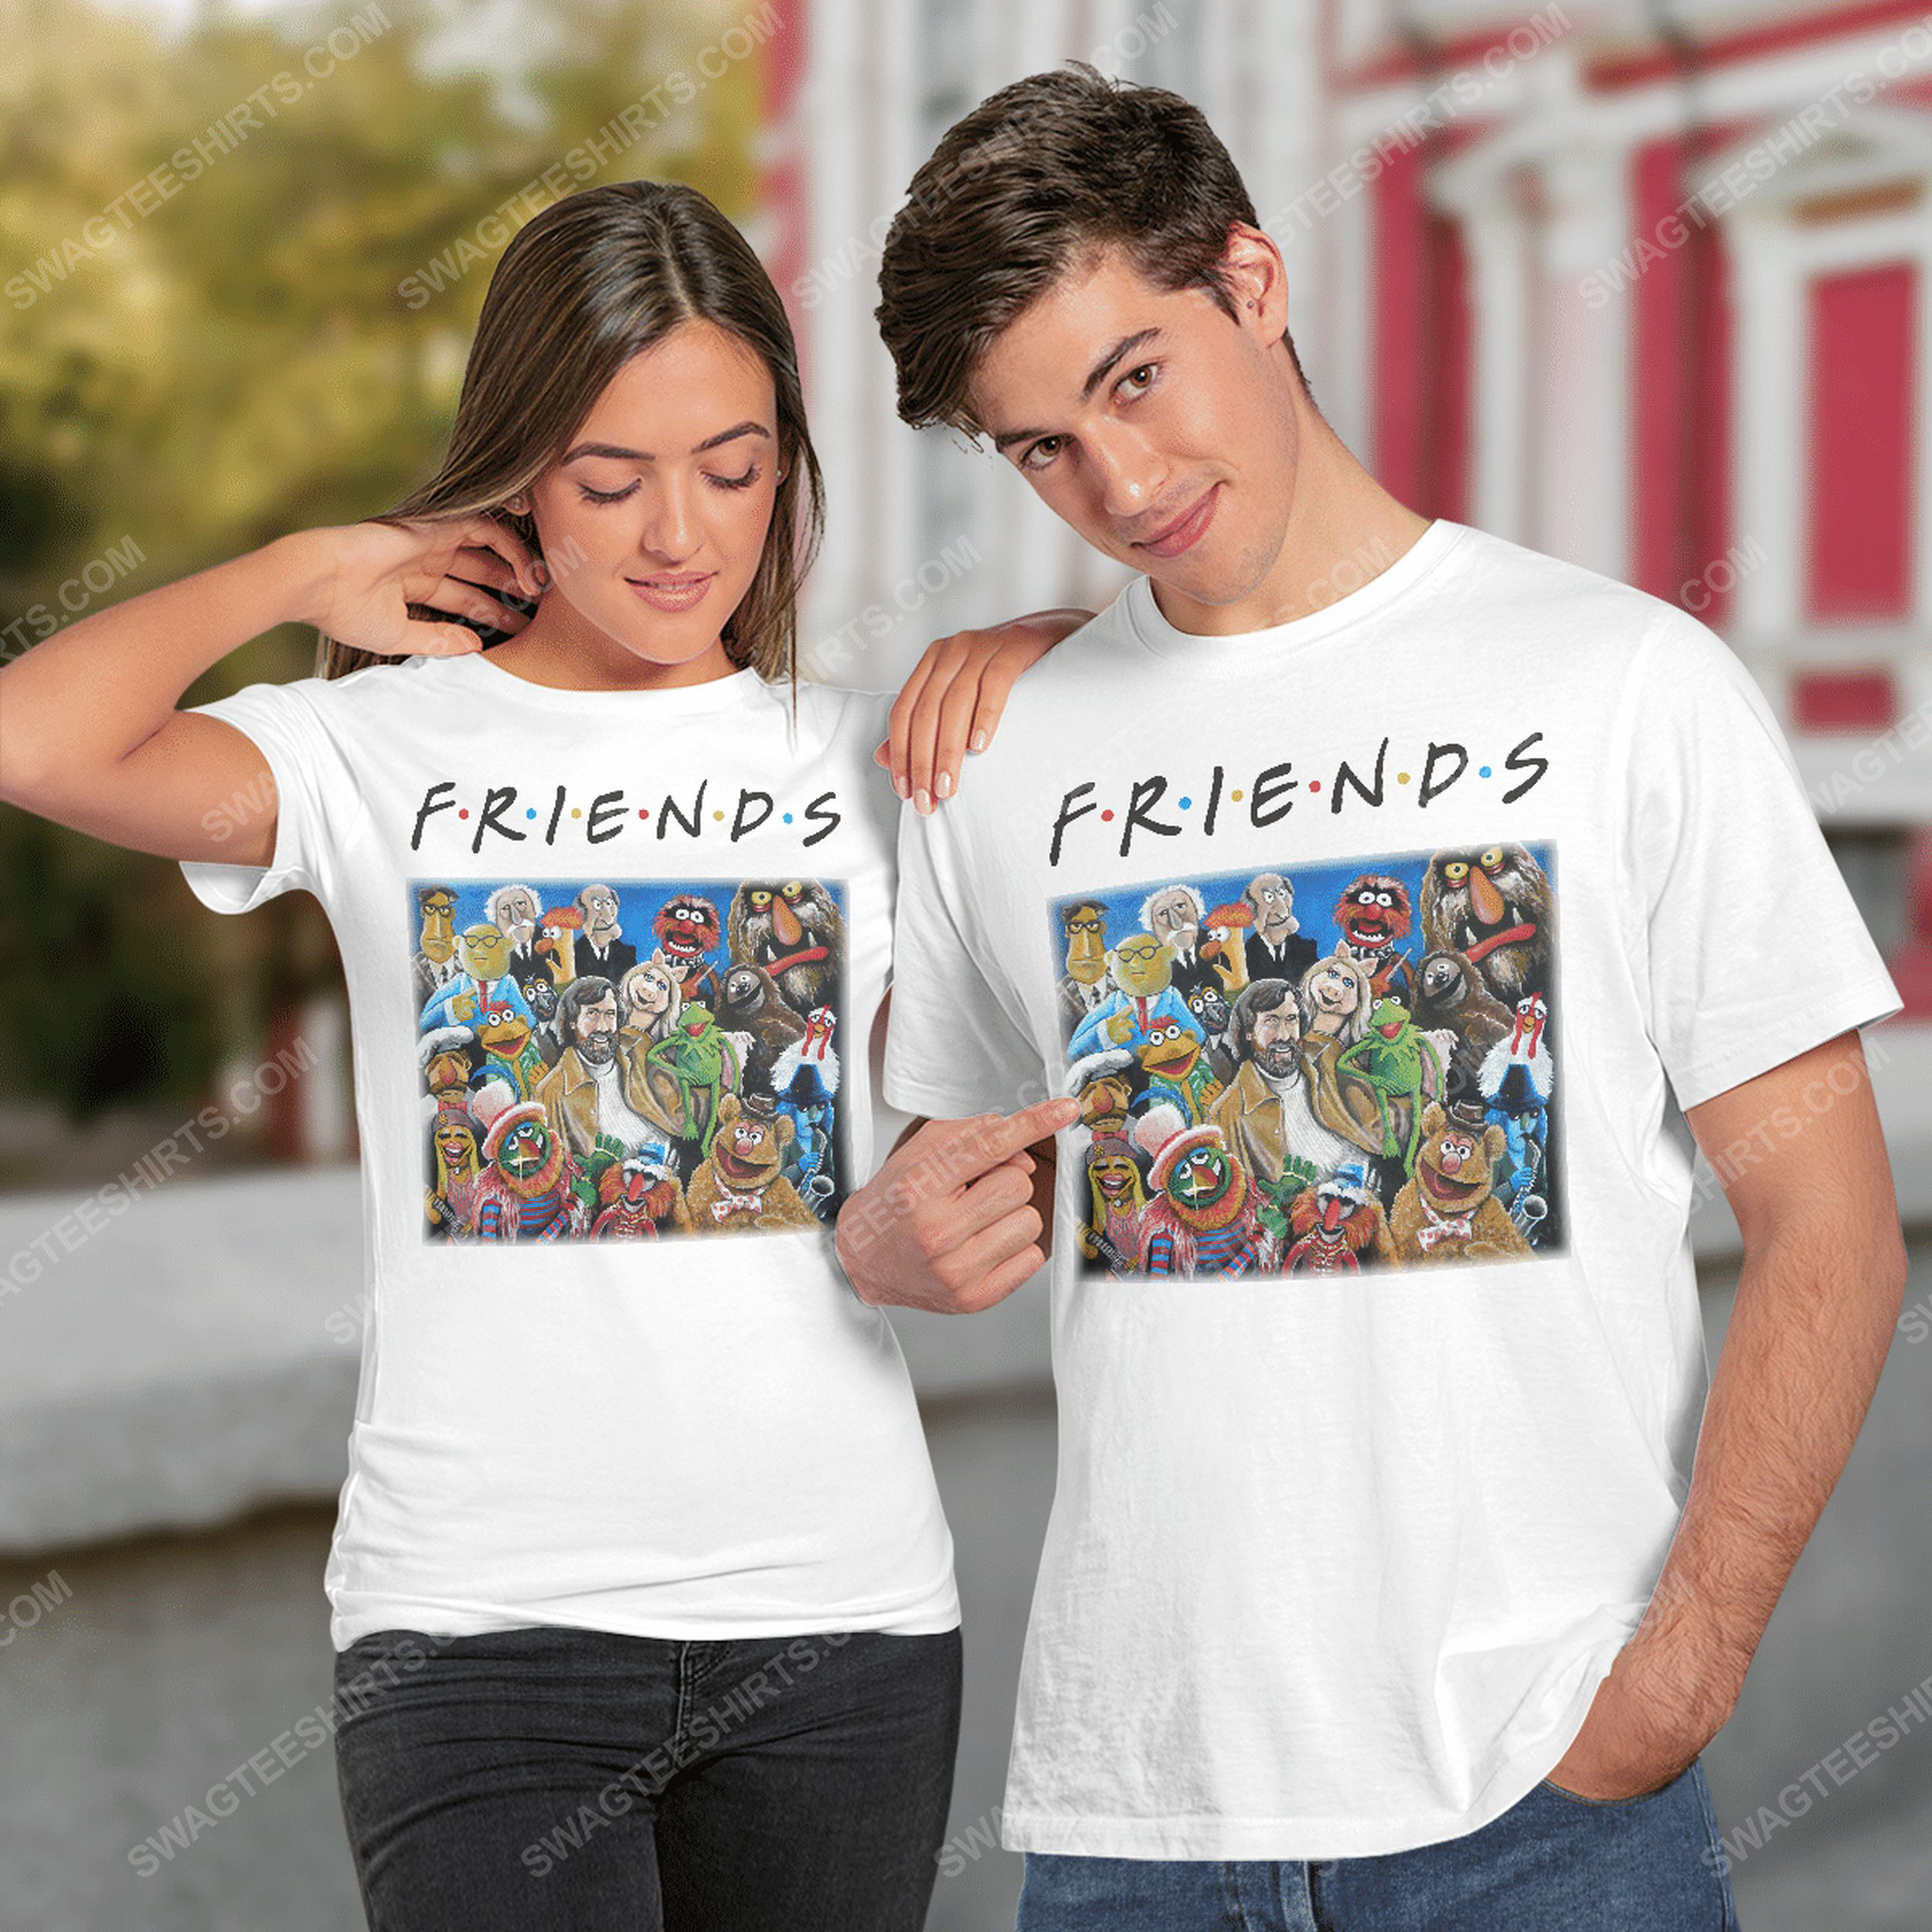 Friends tv show the muppets characters tshirt(1)